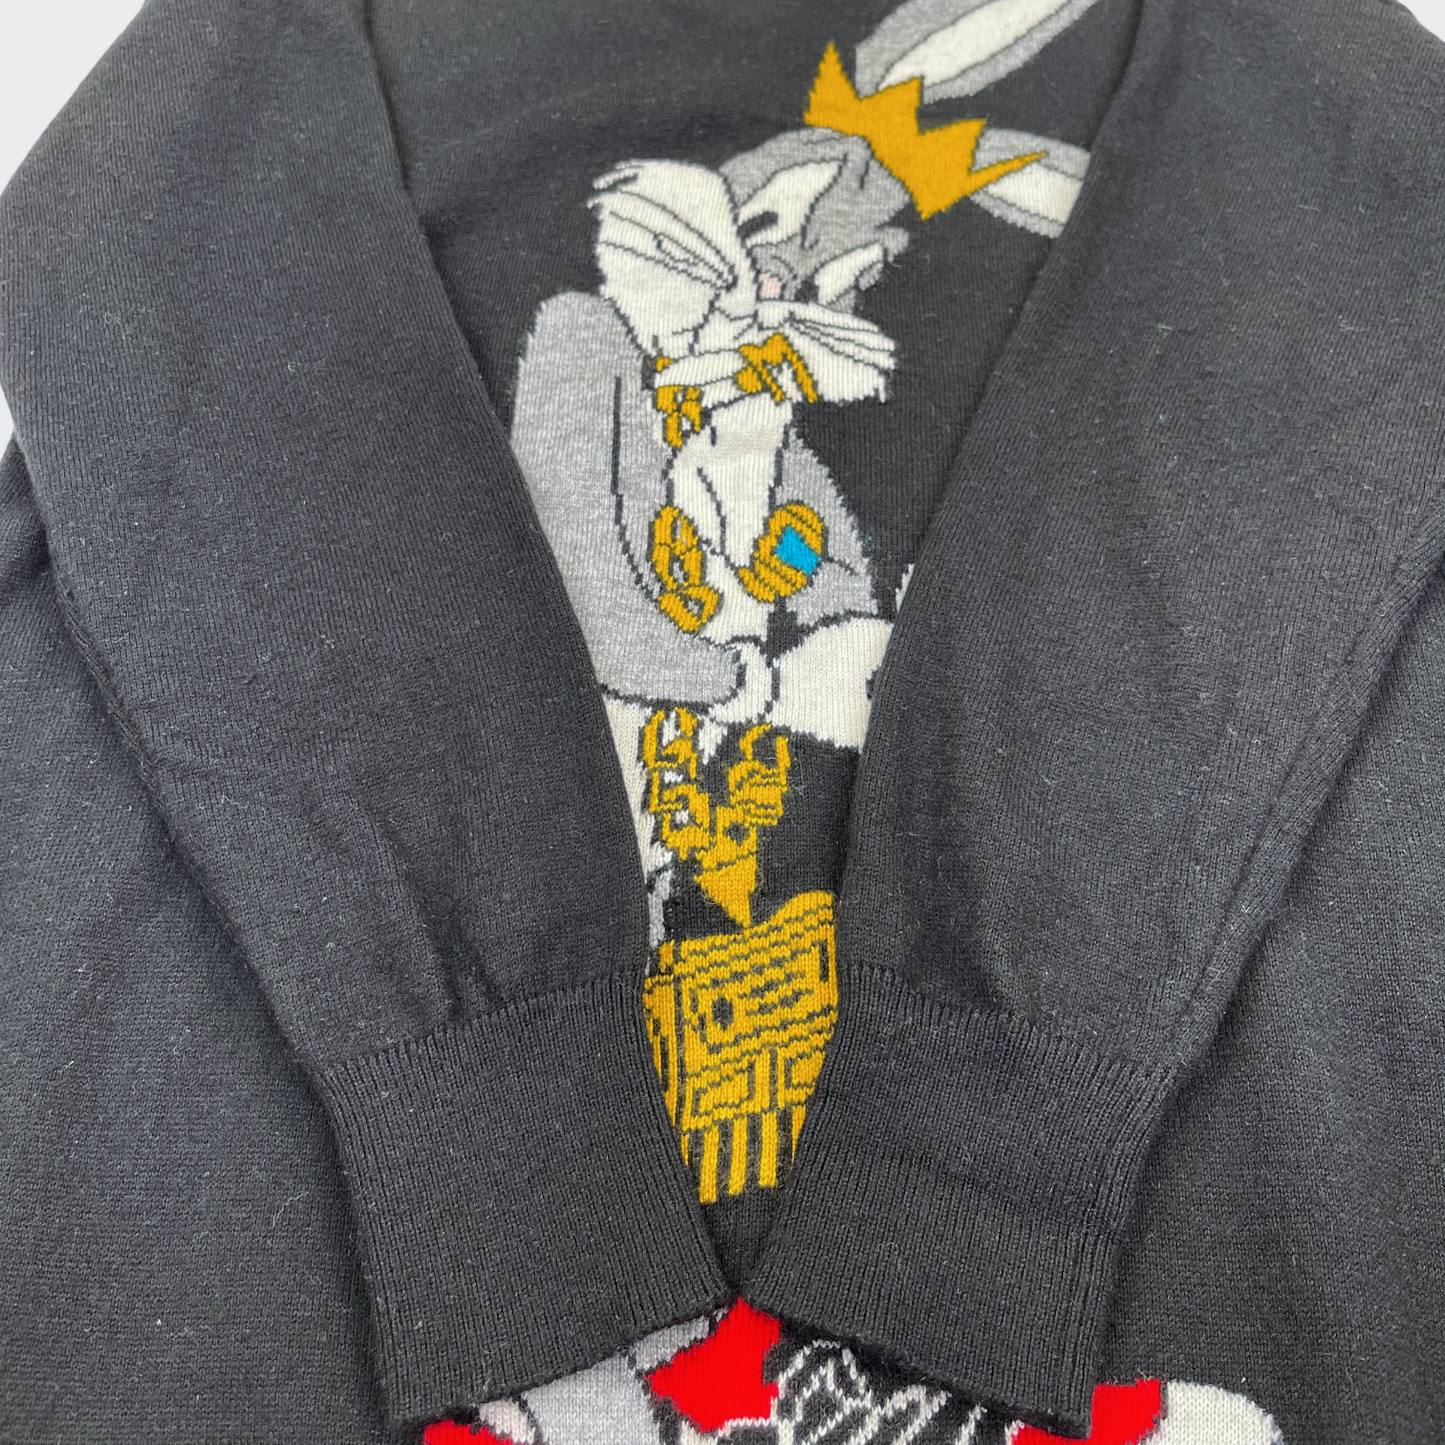 Moschino Couture 2015 Looney Tunes Bugs Bunny Black Wool Sweater Mini Dress XS/S